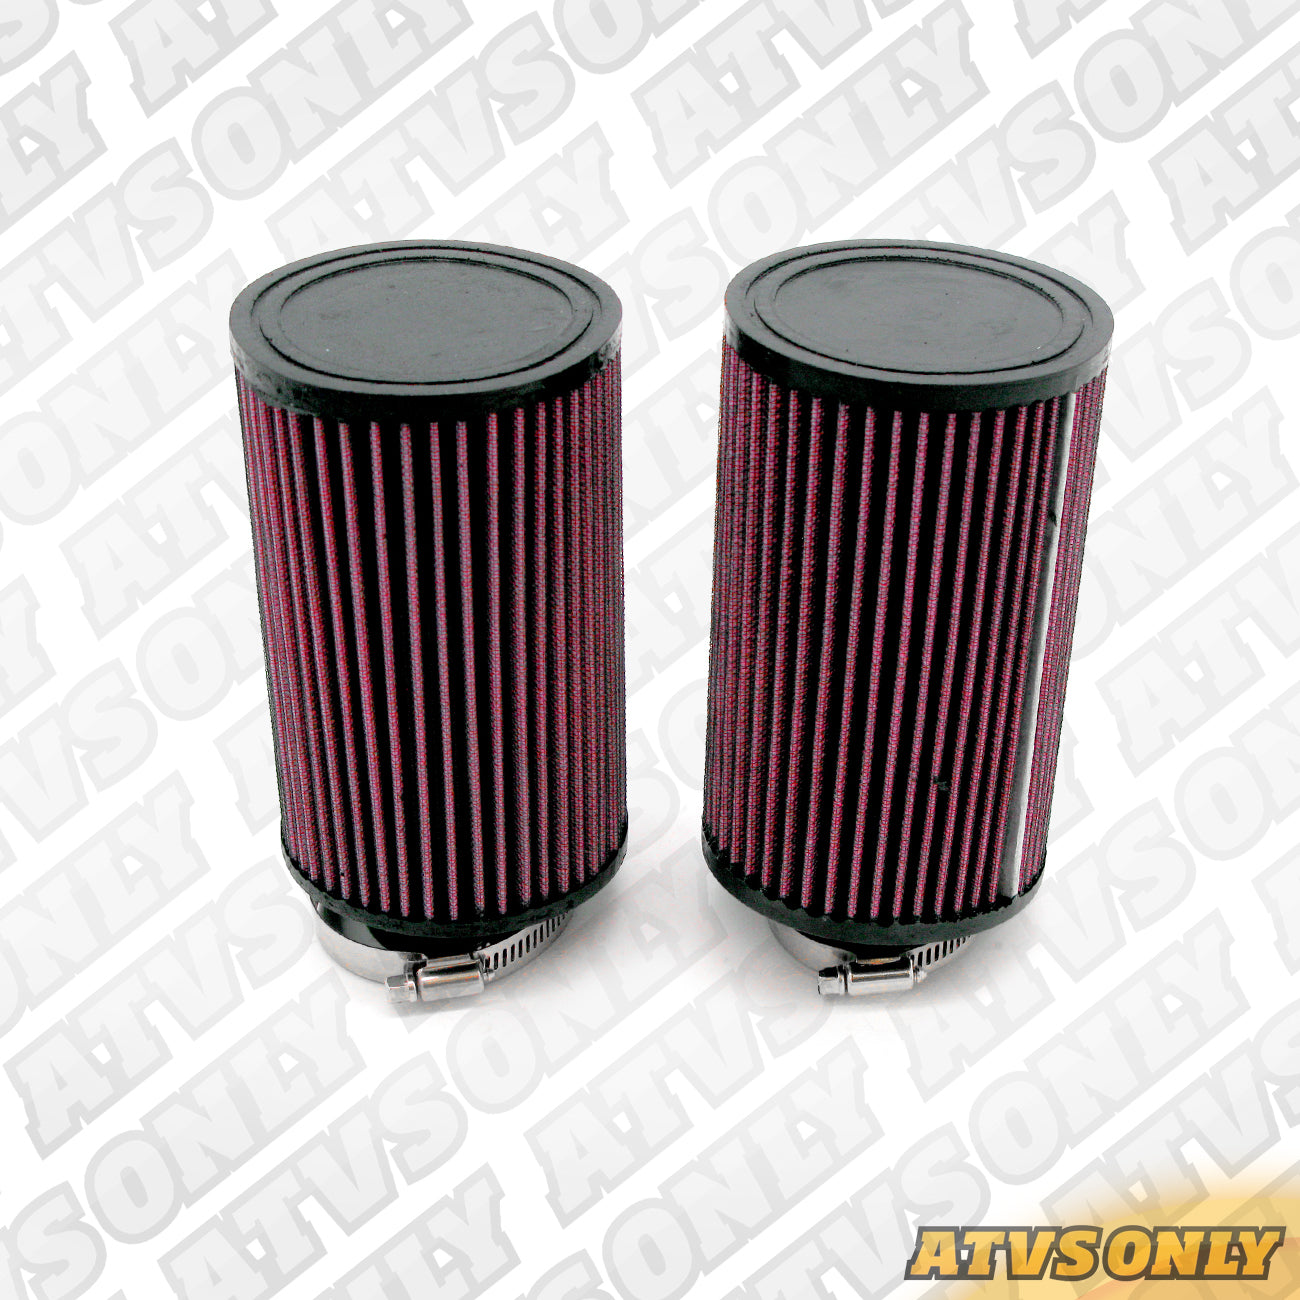 Air Filter (K&N) with Outerwear for Yamaha Banshee